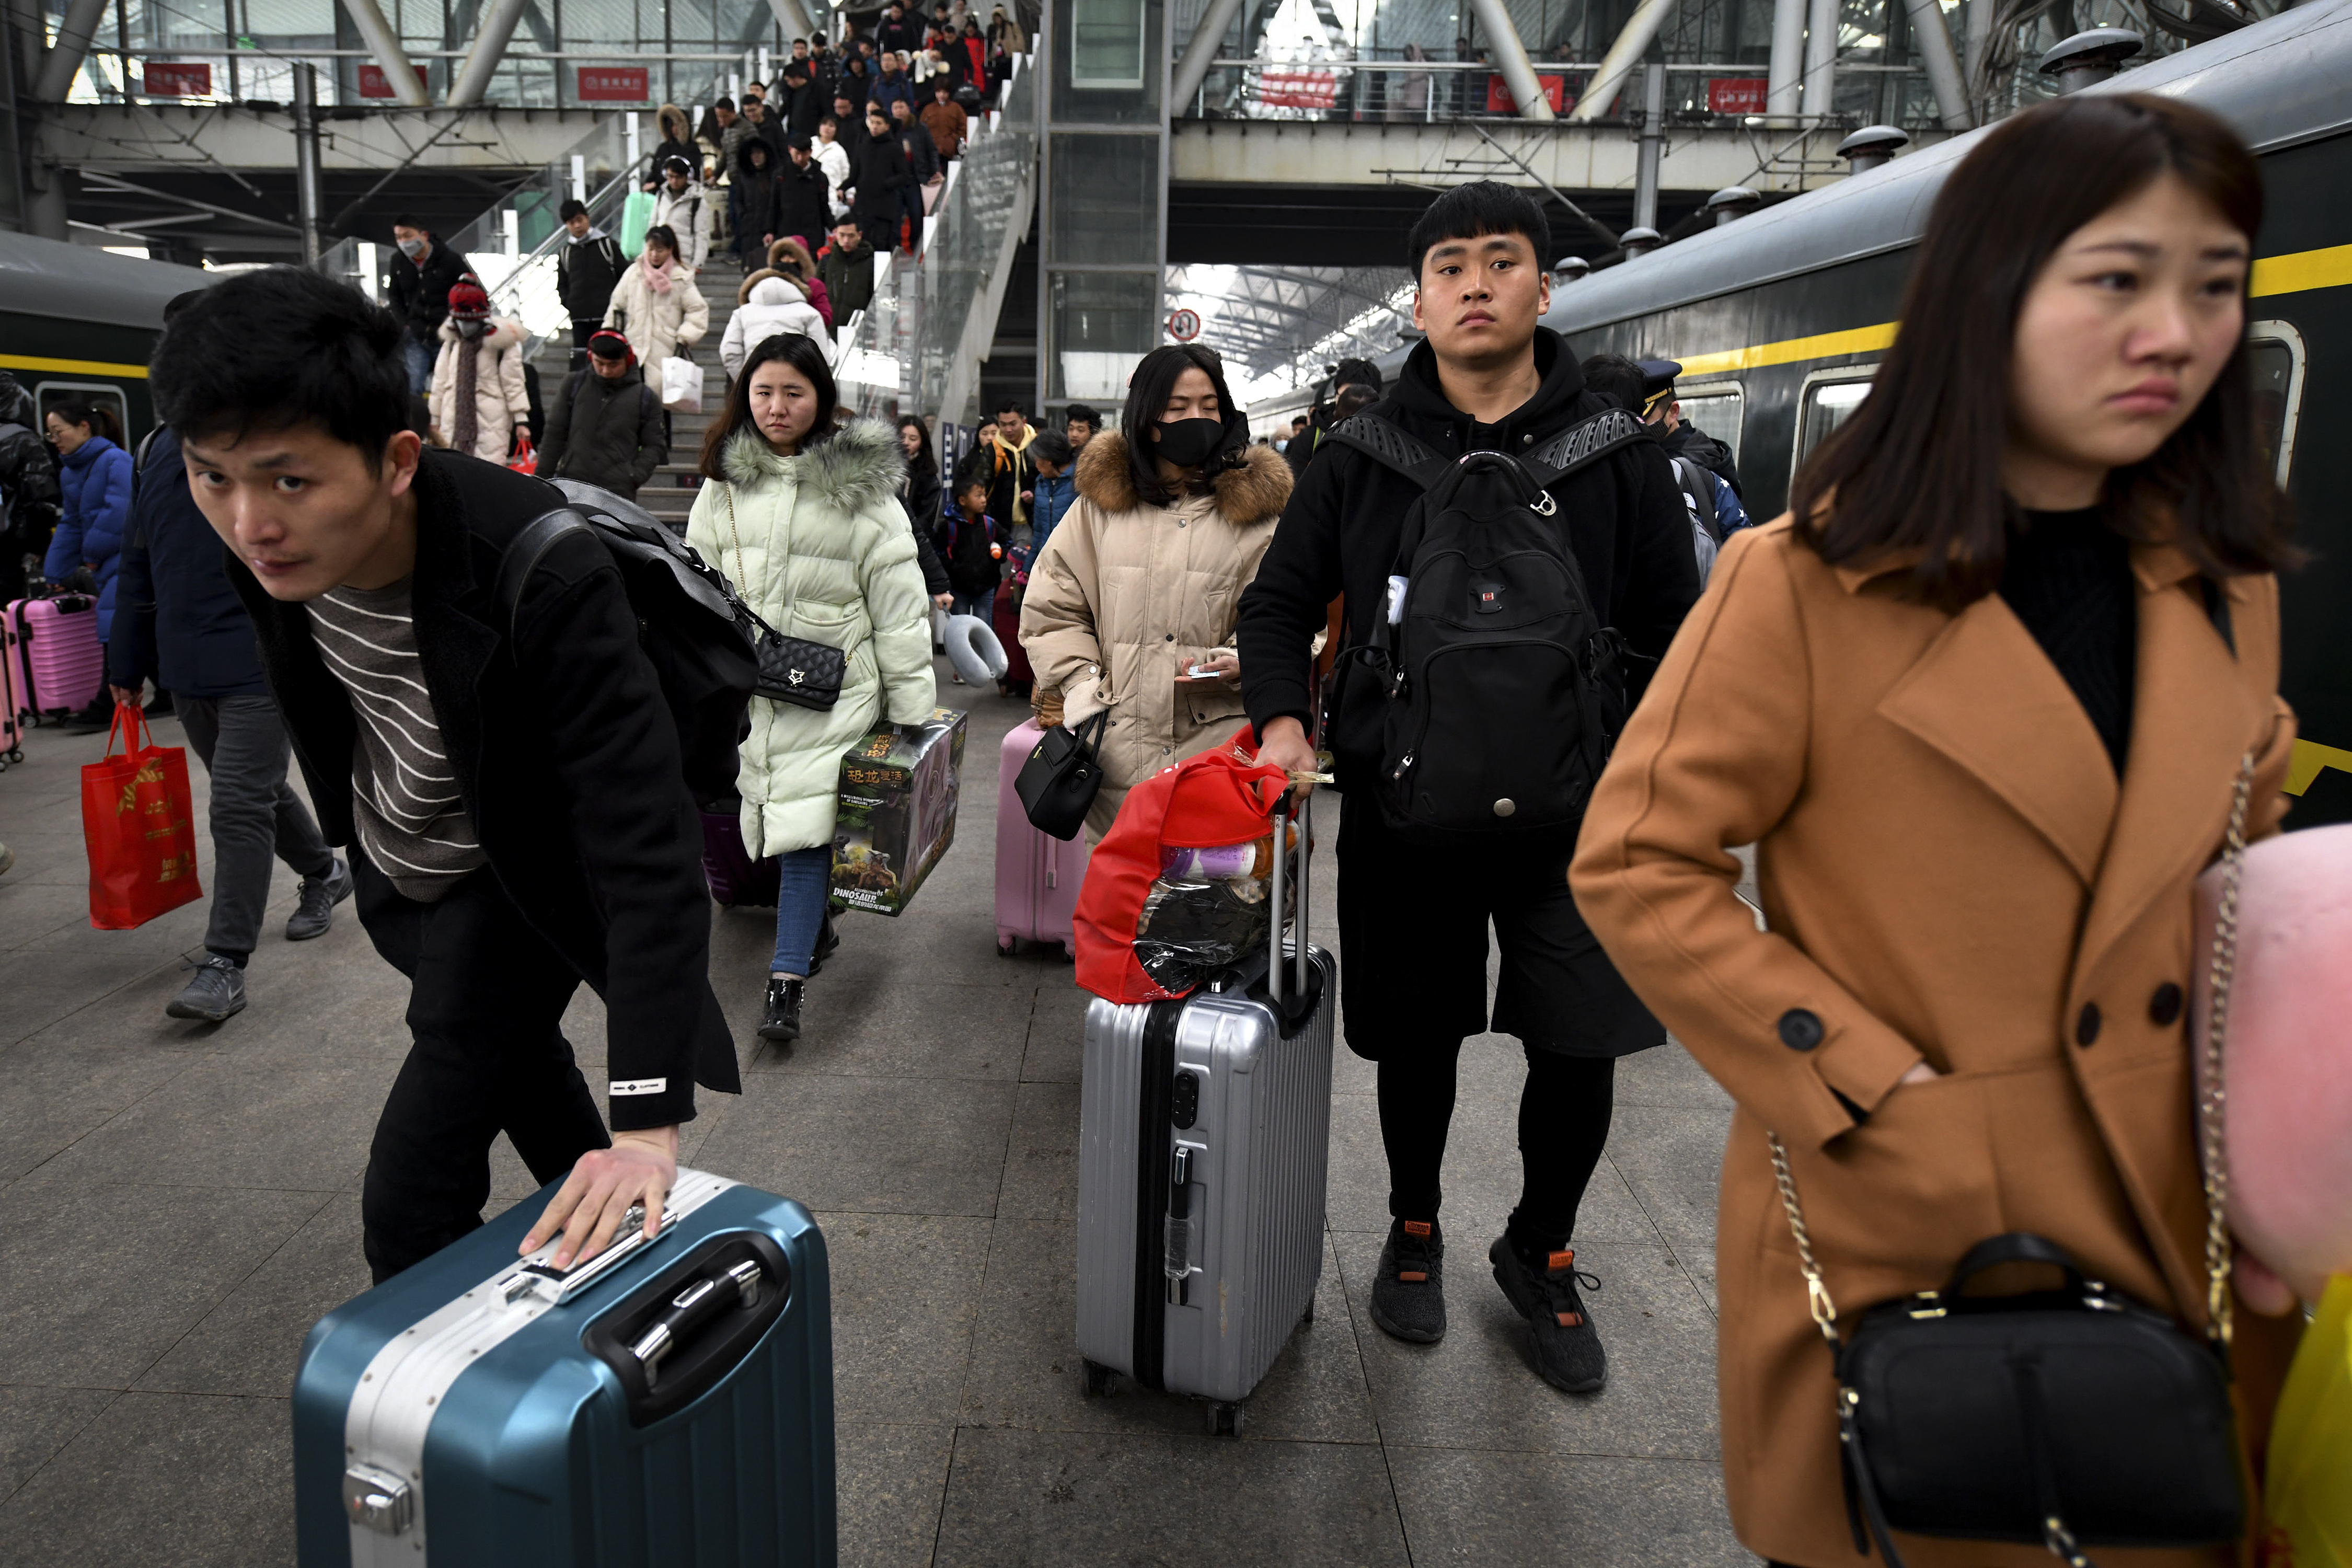 Chinese travelers with their luggage rush to catch their trains at a railway station in Fuyang in central China's Anhui province, Sunday, Feb. 10, 2019. Millions of Chinese are start returning to work after spending a weeklong Lunar New Year holiday with families in their hometown. (Chinatopix via AP)